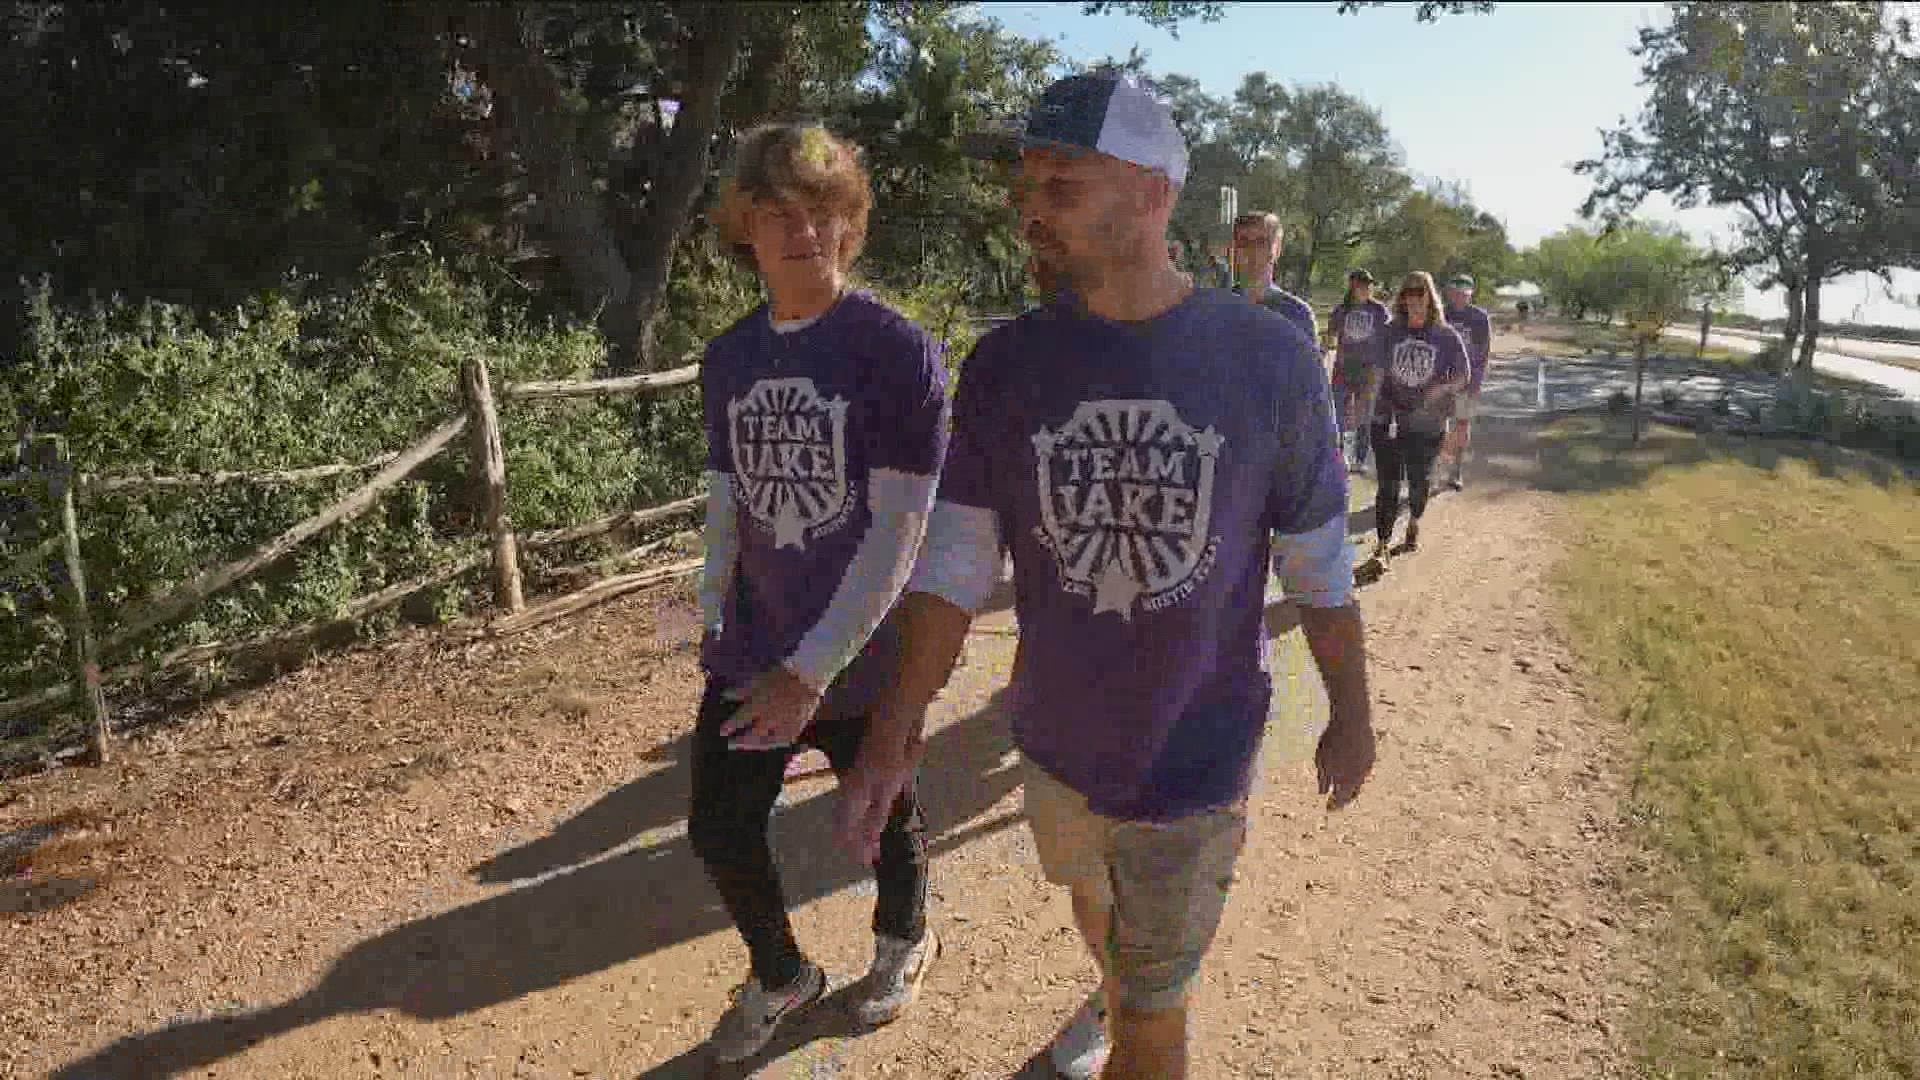 Residents walked to support those struggling with mental illness and raise awareness. One family walked in honor of Jake, remembering the person he was.